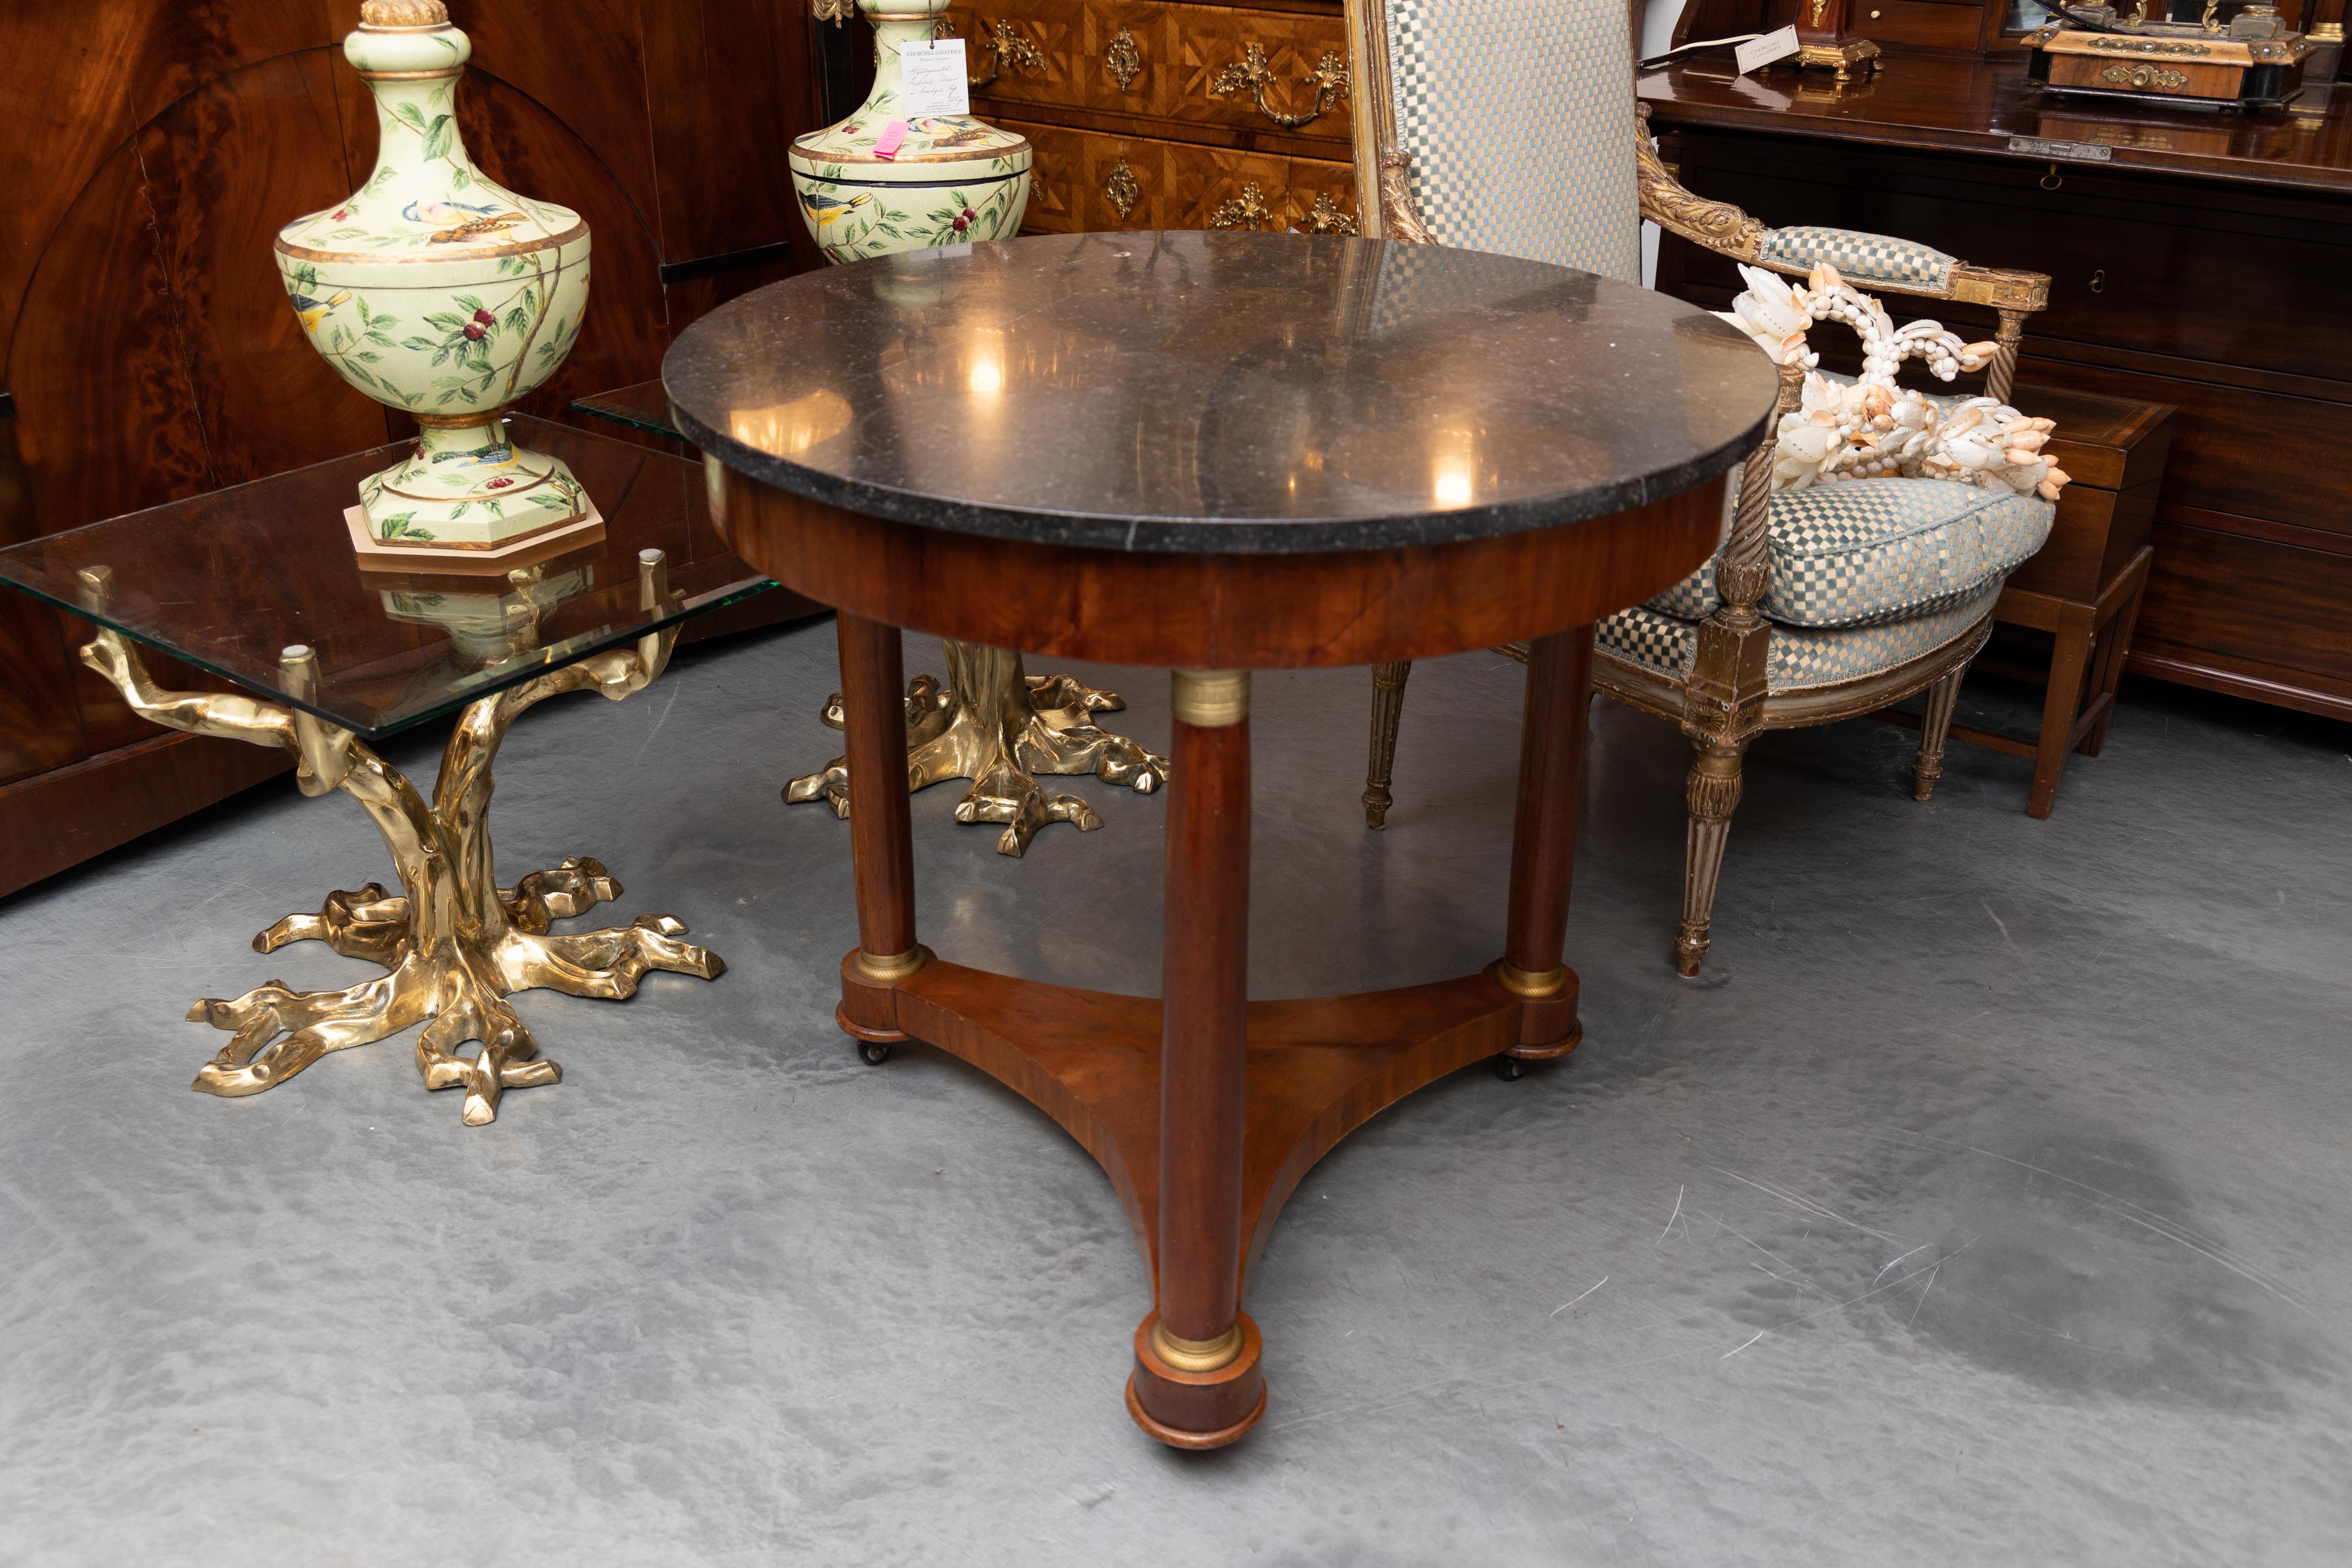 This is a classic French Empire mahogany circular center table, the black marble top over a wide frieze supported by round, slightly tapering columns with brass collars, joined by a full mahogany tripartite base, circa 1830.